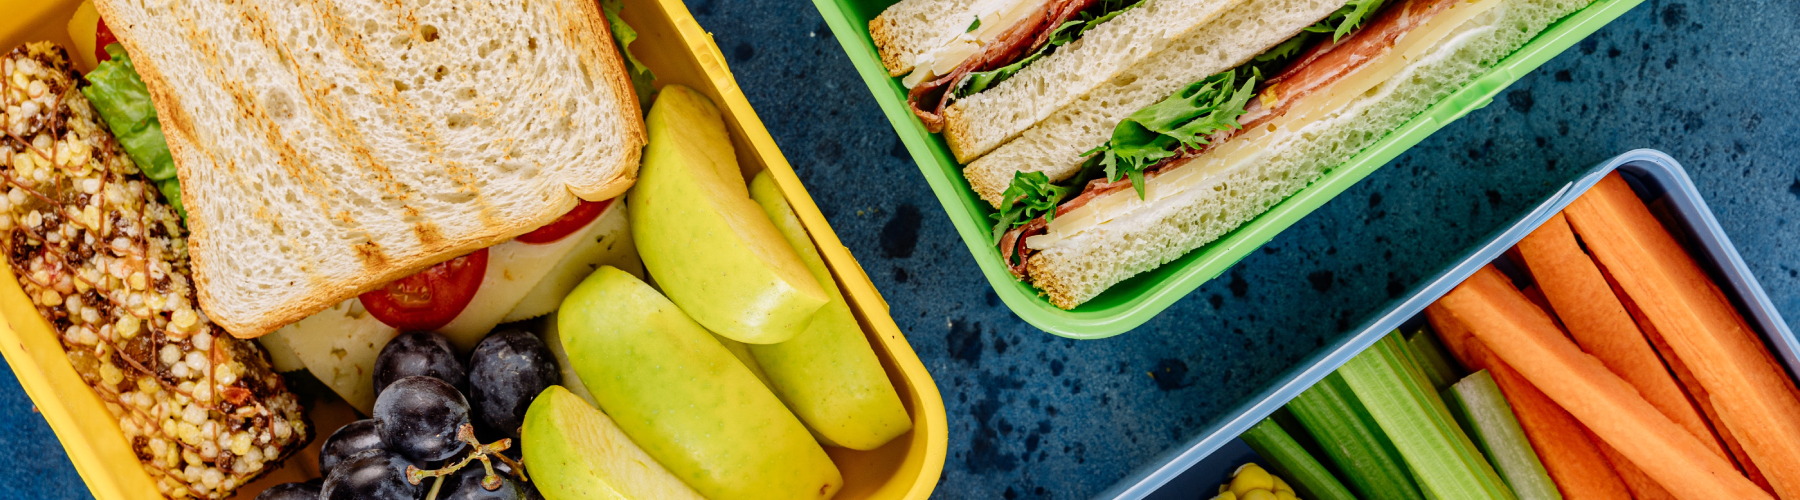 Two lunch boxes with fruit and a sandwich inside